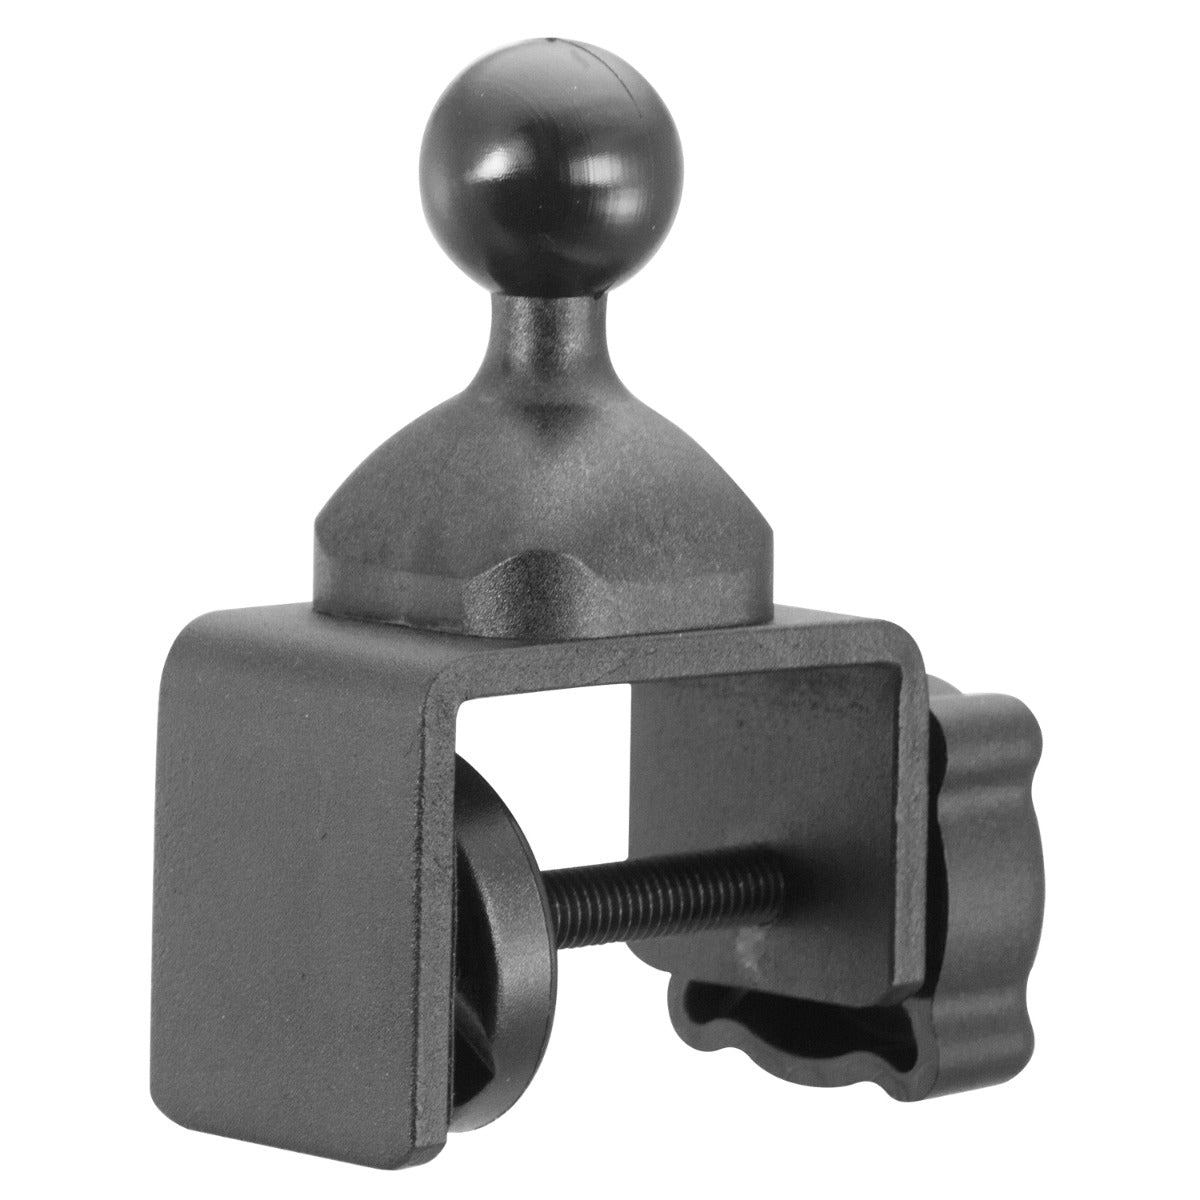 iBOLT 17mm Dual Ball Clamp Mount for Handlebars, Poles, Posts for Garmin GPS and iBOLT Phone Holders